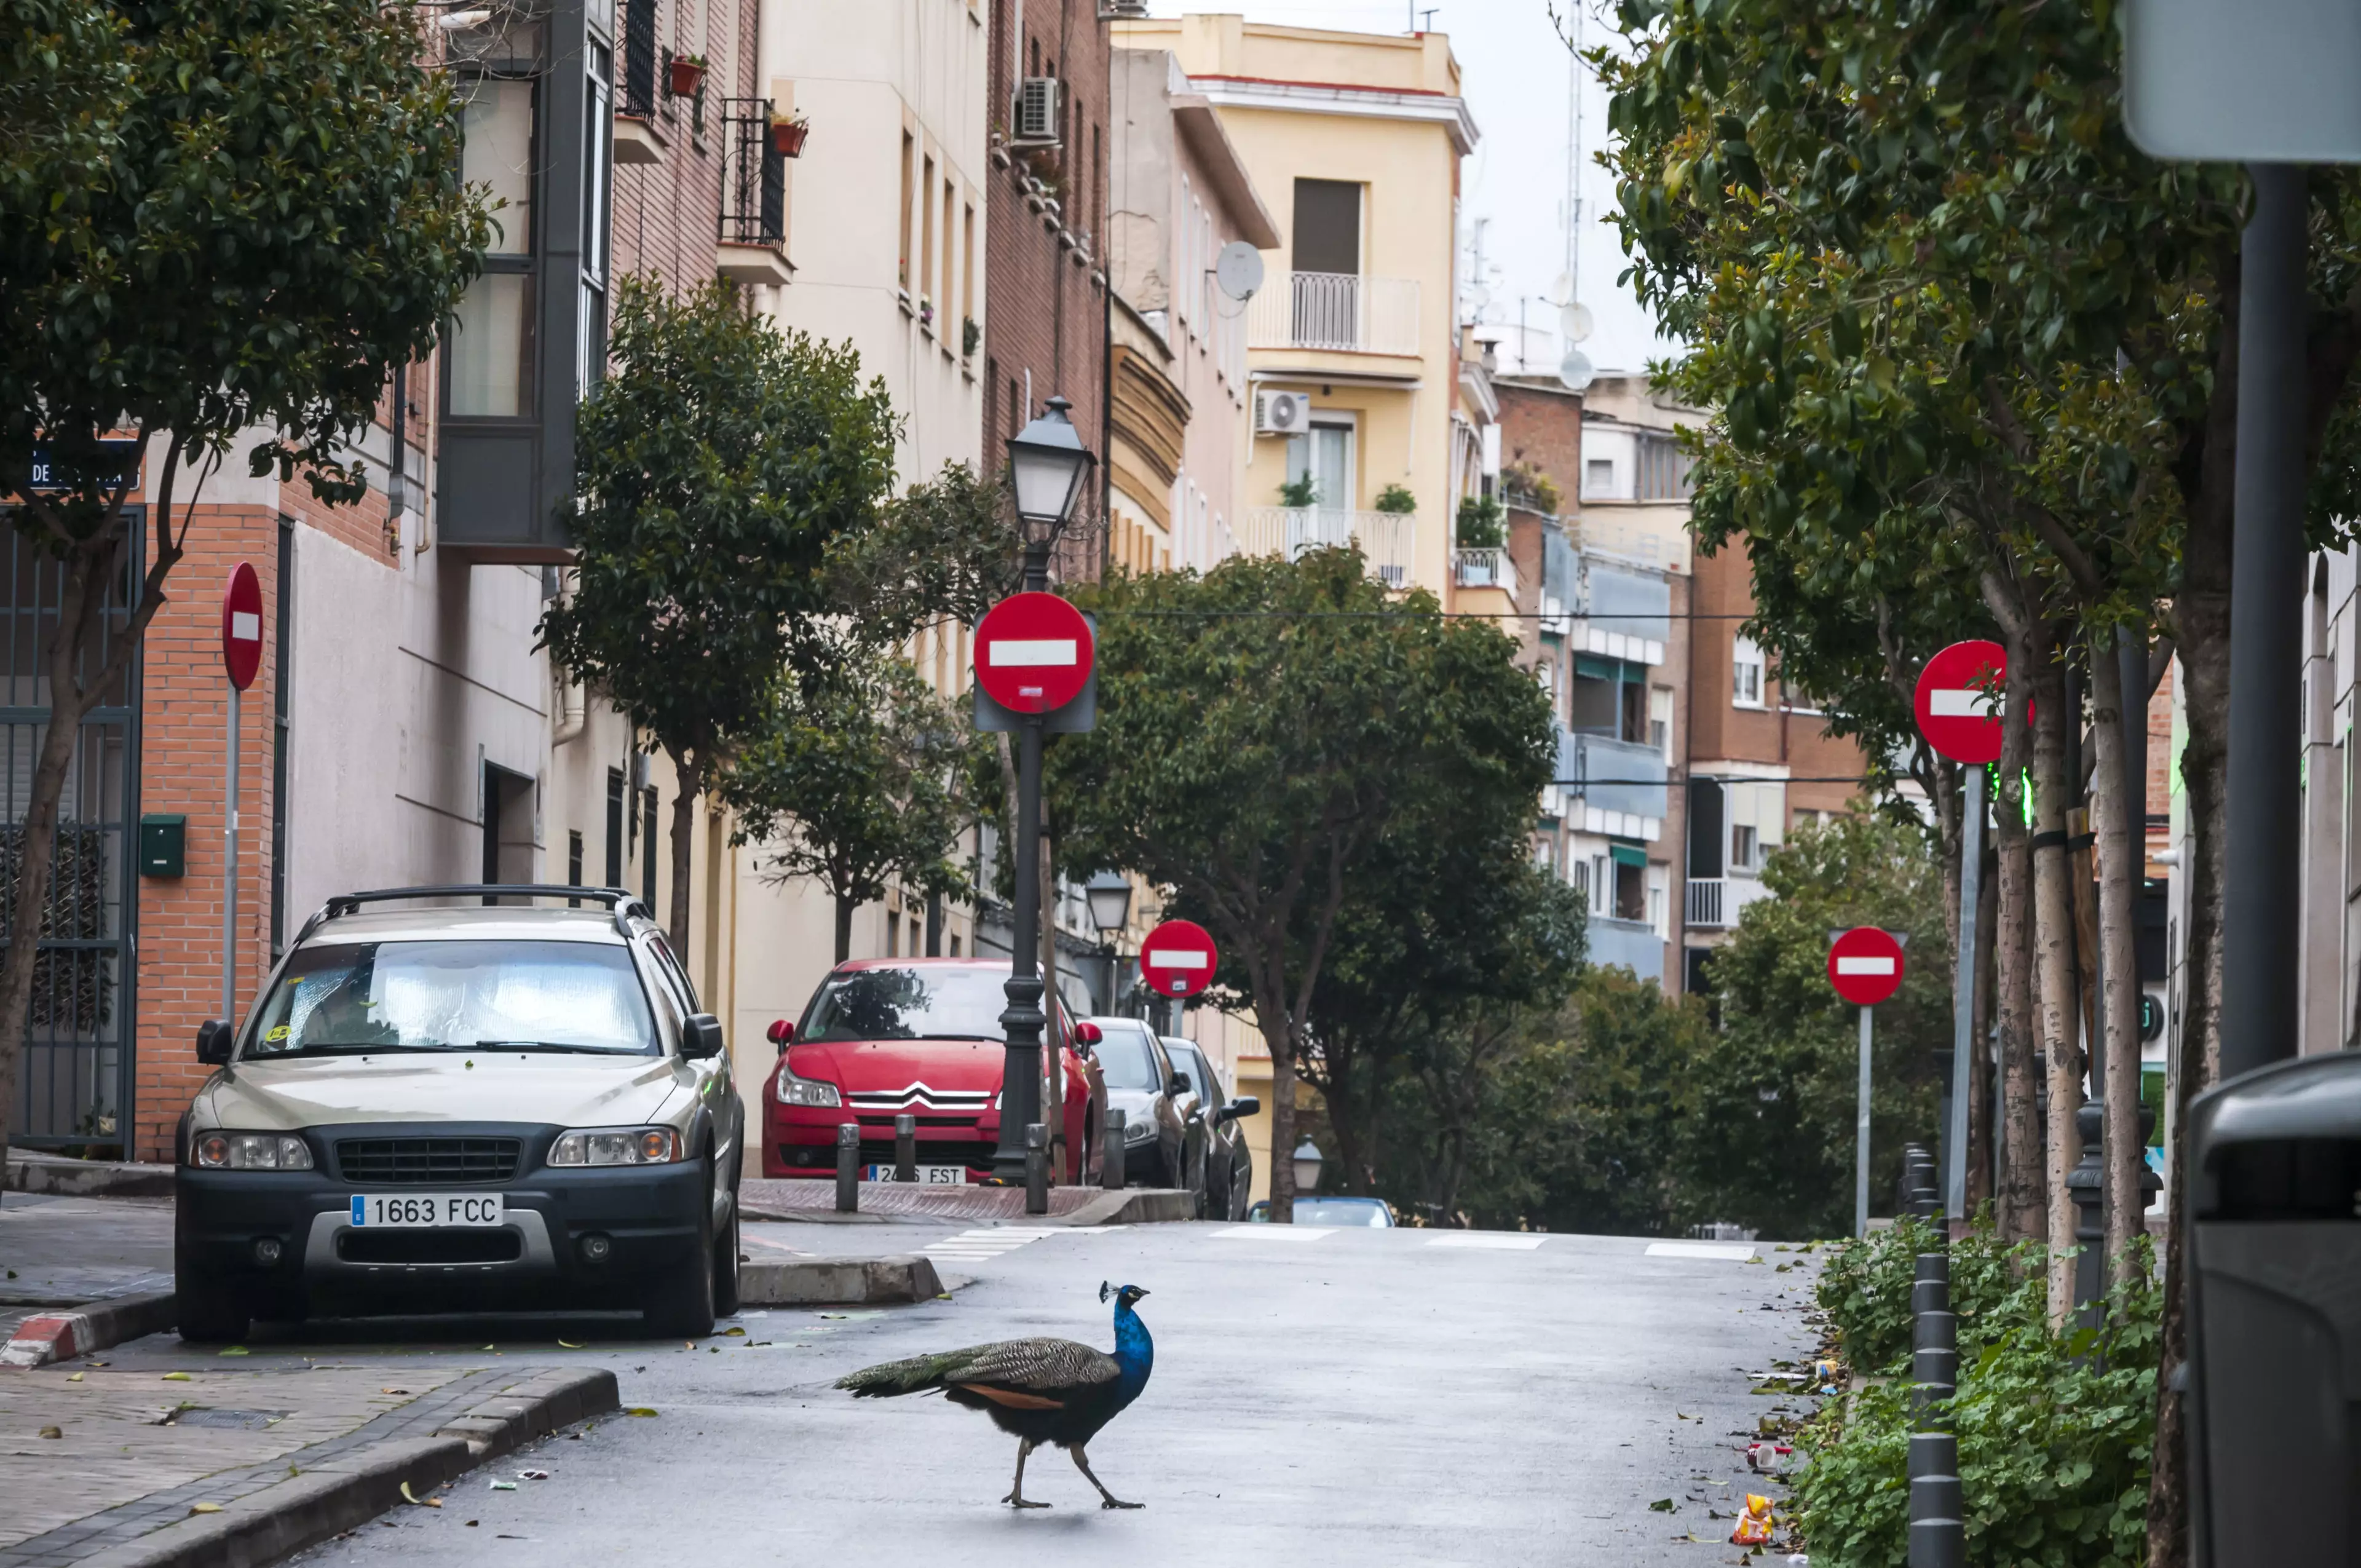 Peacocks have also been taking over other cities, like these ones in Madrid.